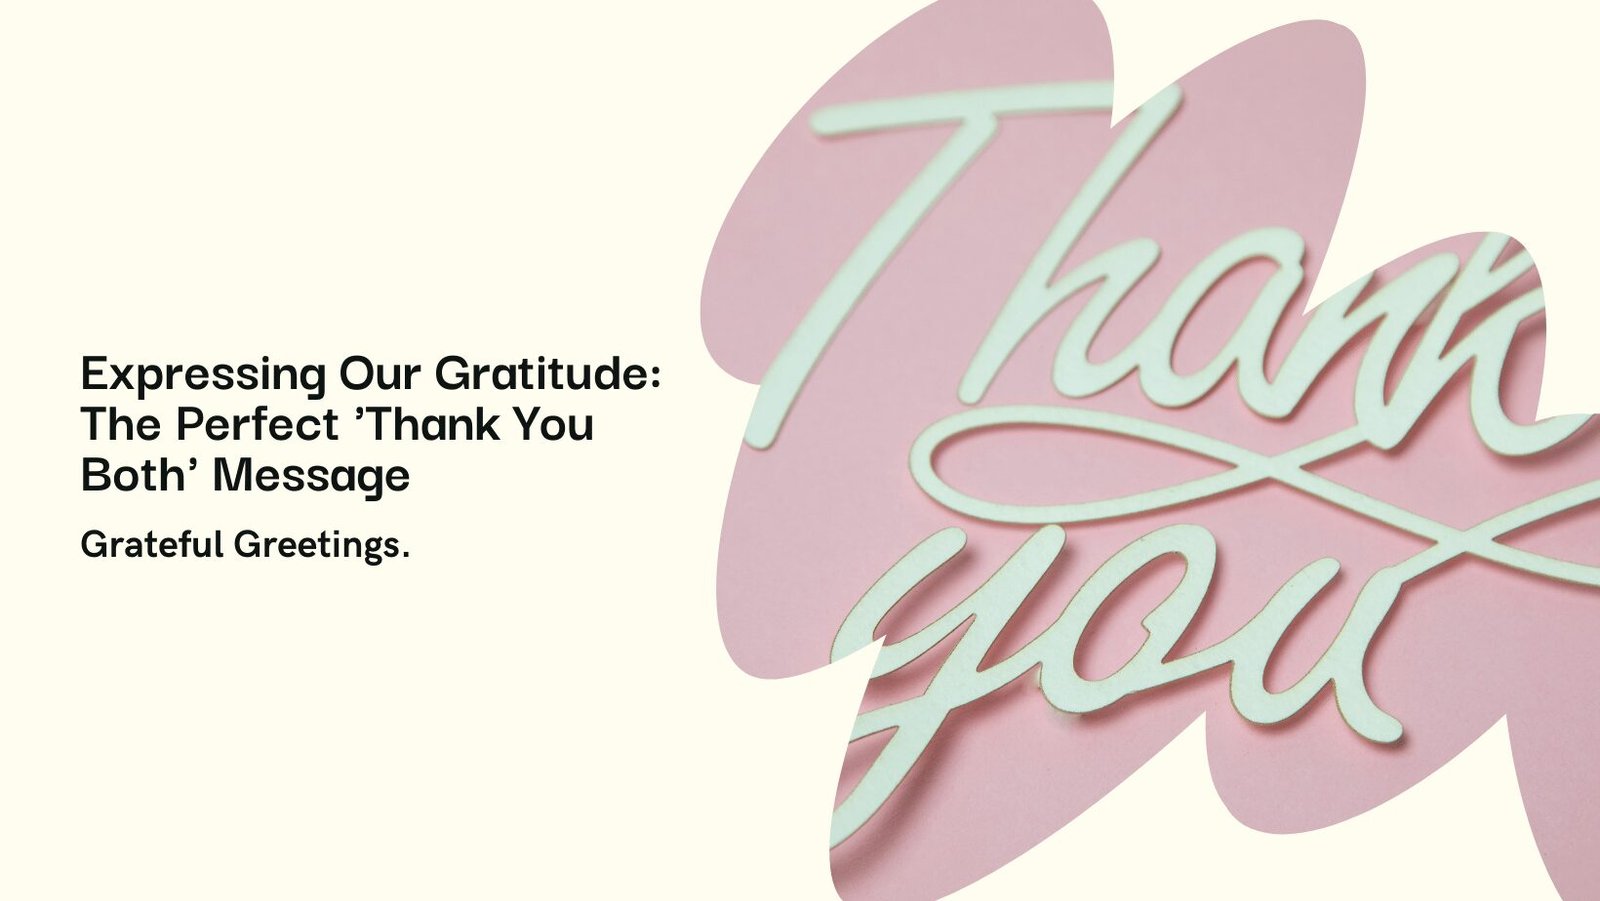 Expressing Gratitude Crafting the Perfect 'Thank You Both' Message for Every Occasion